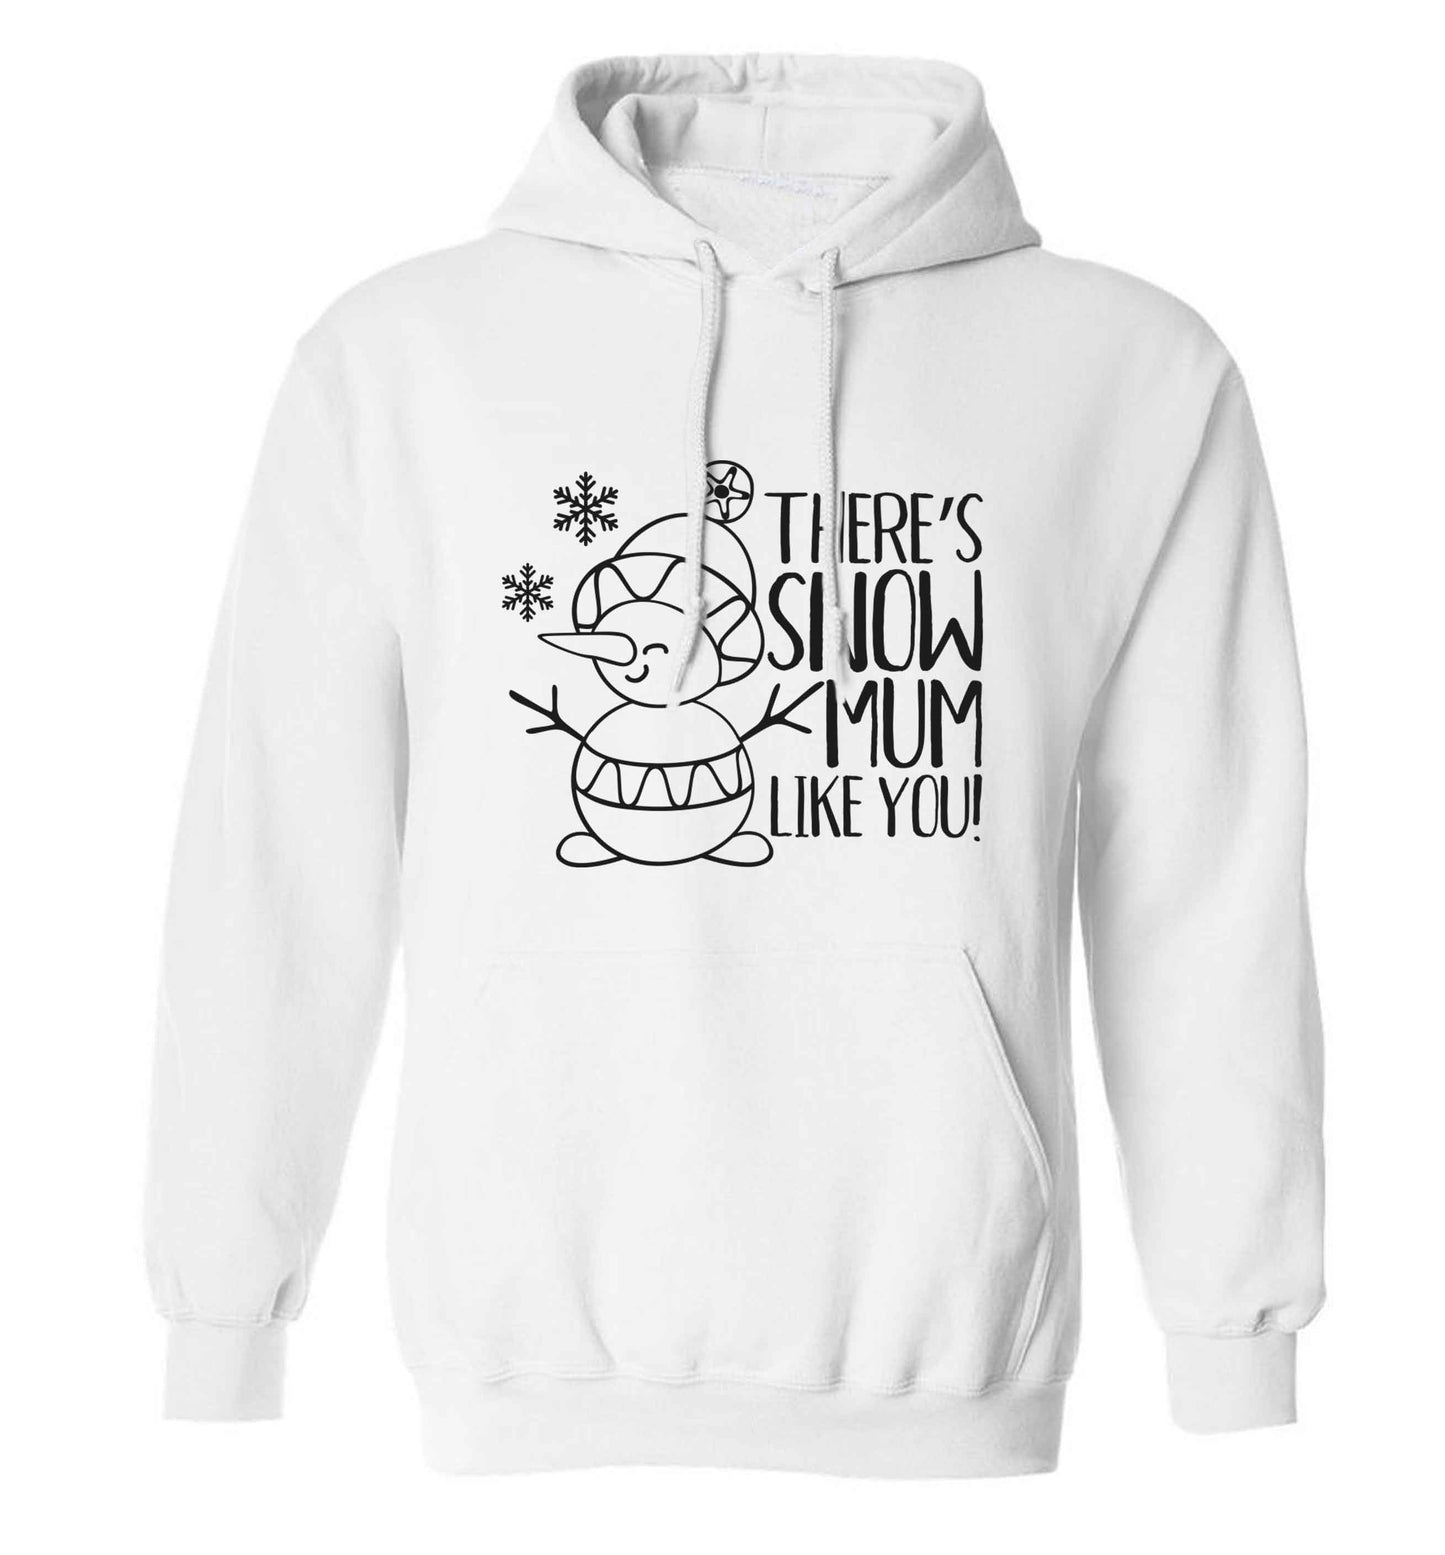 There's snow mum like you adults unisex white hoodie 2XL